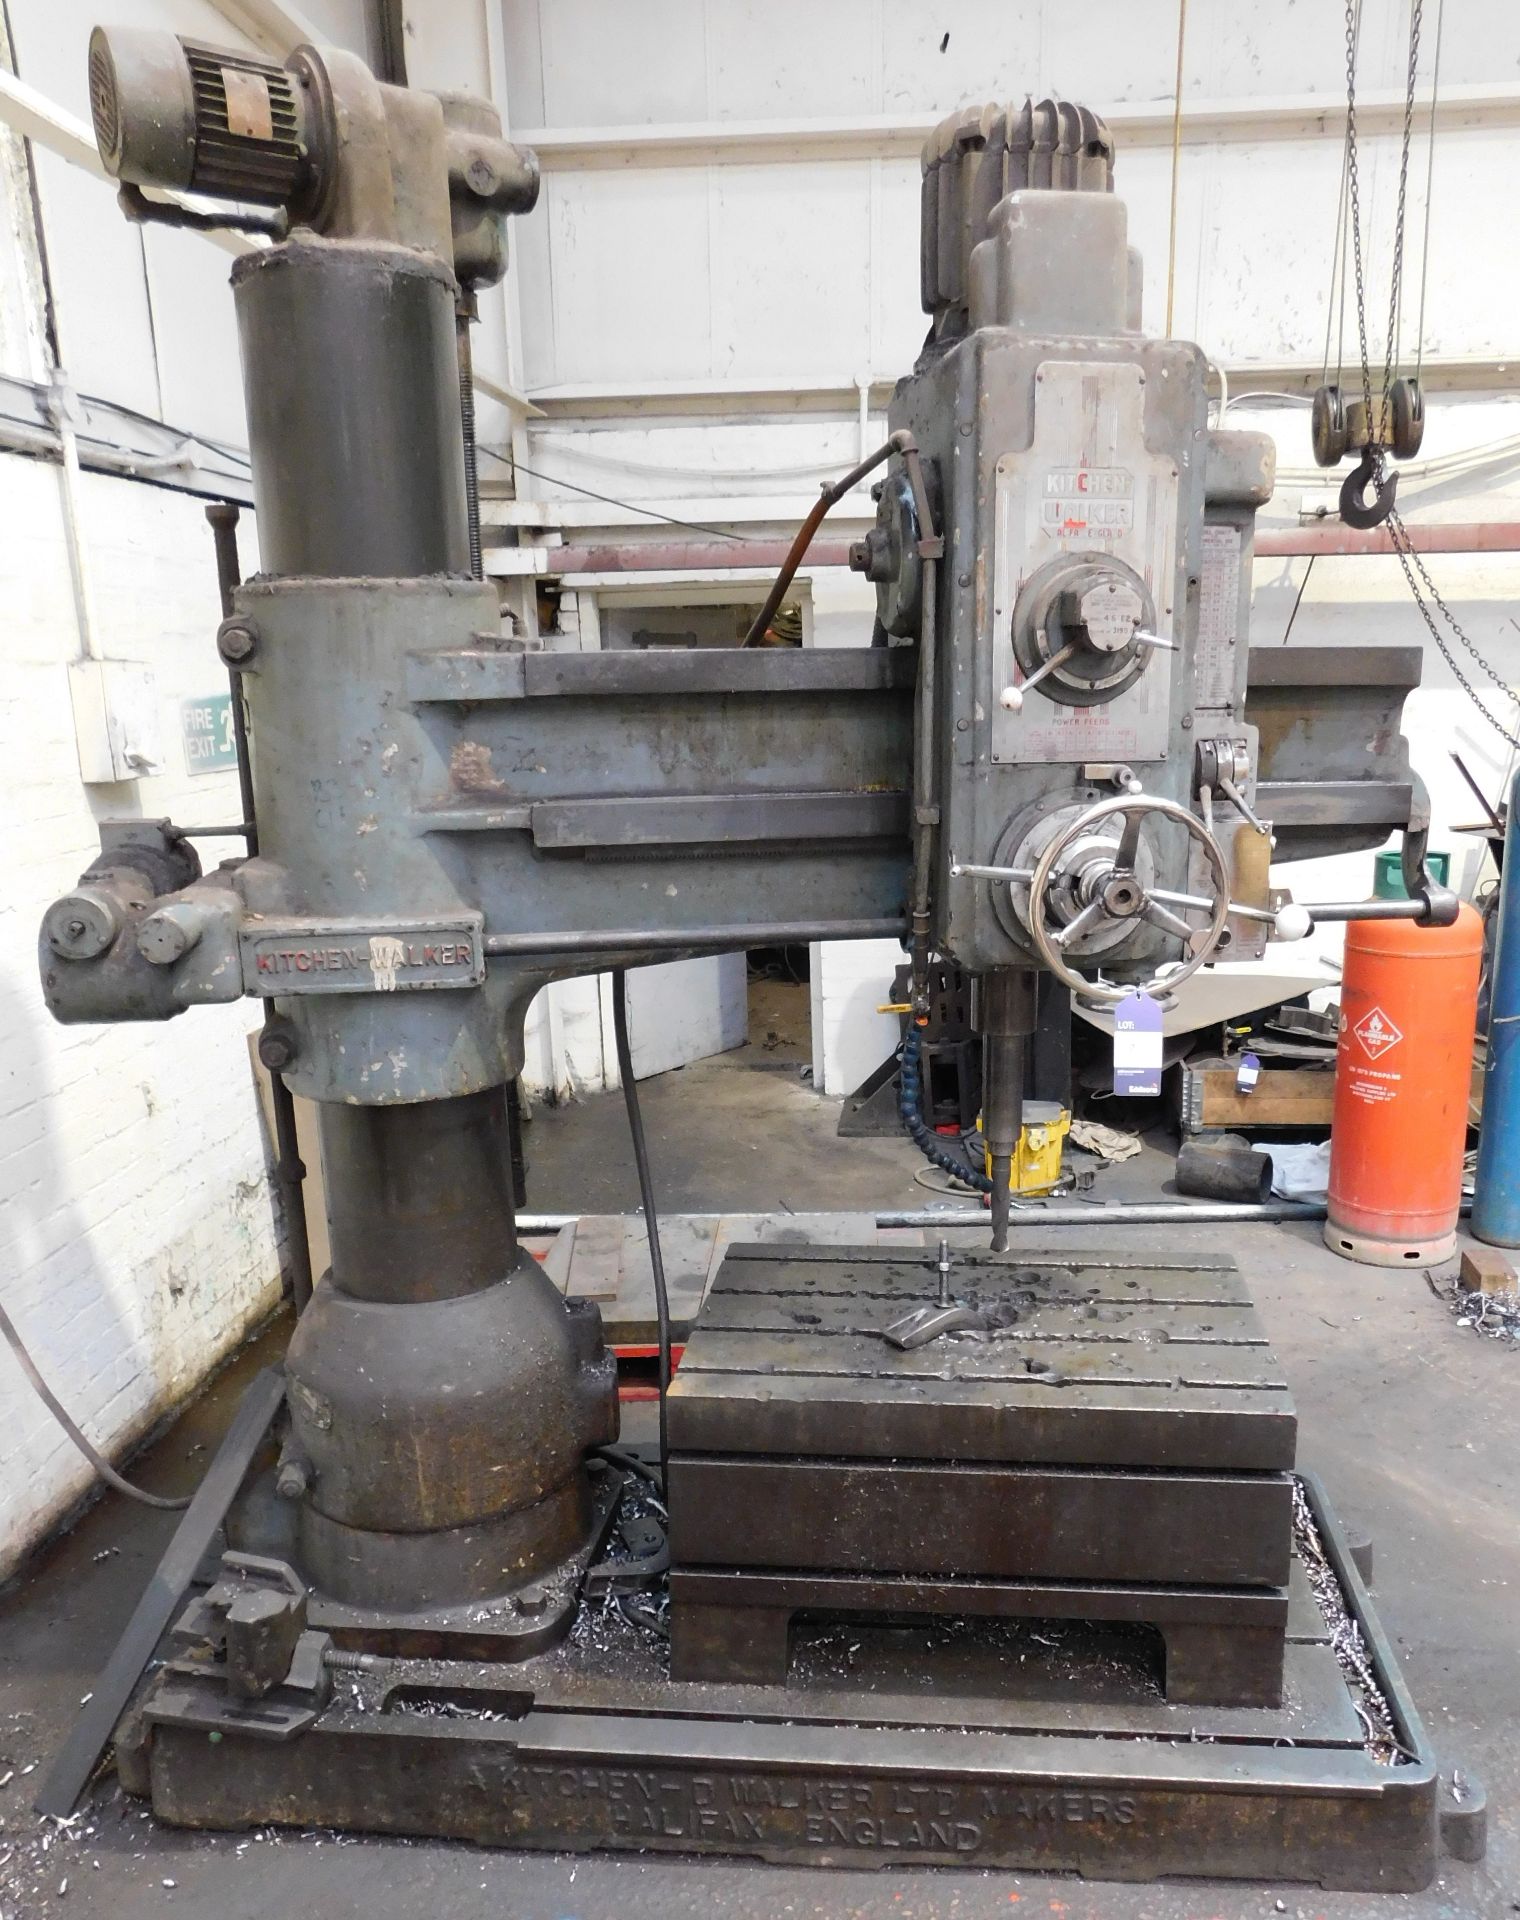 Kitchen & Walker Radial Arm Drill, with Assorted Drill Bits – Risk Assessment & Method Statement